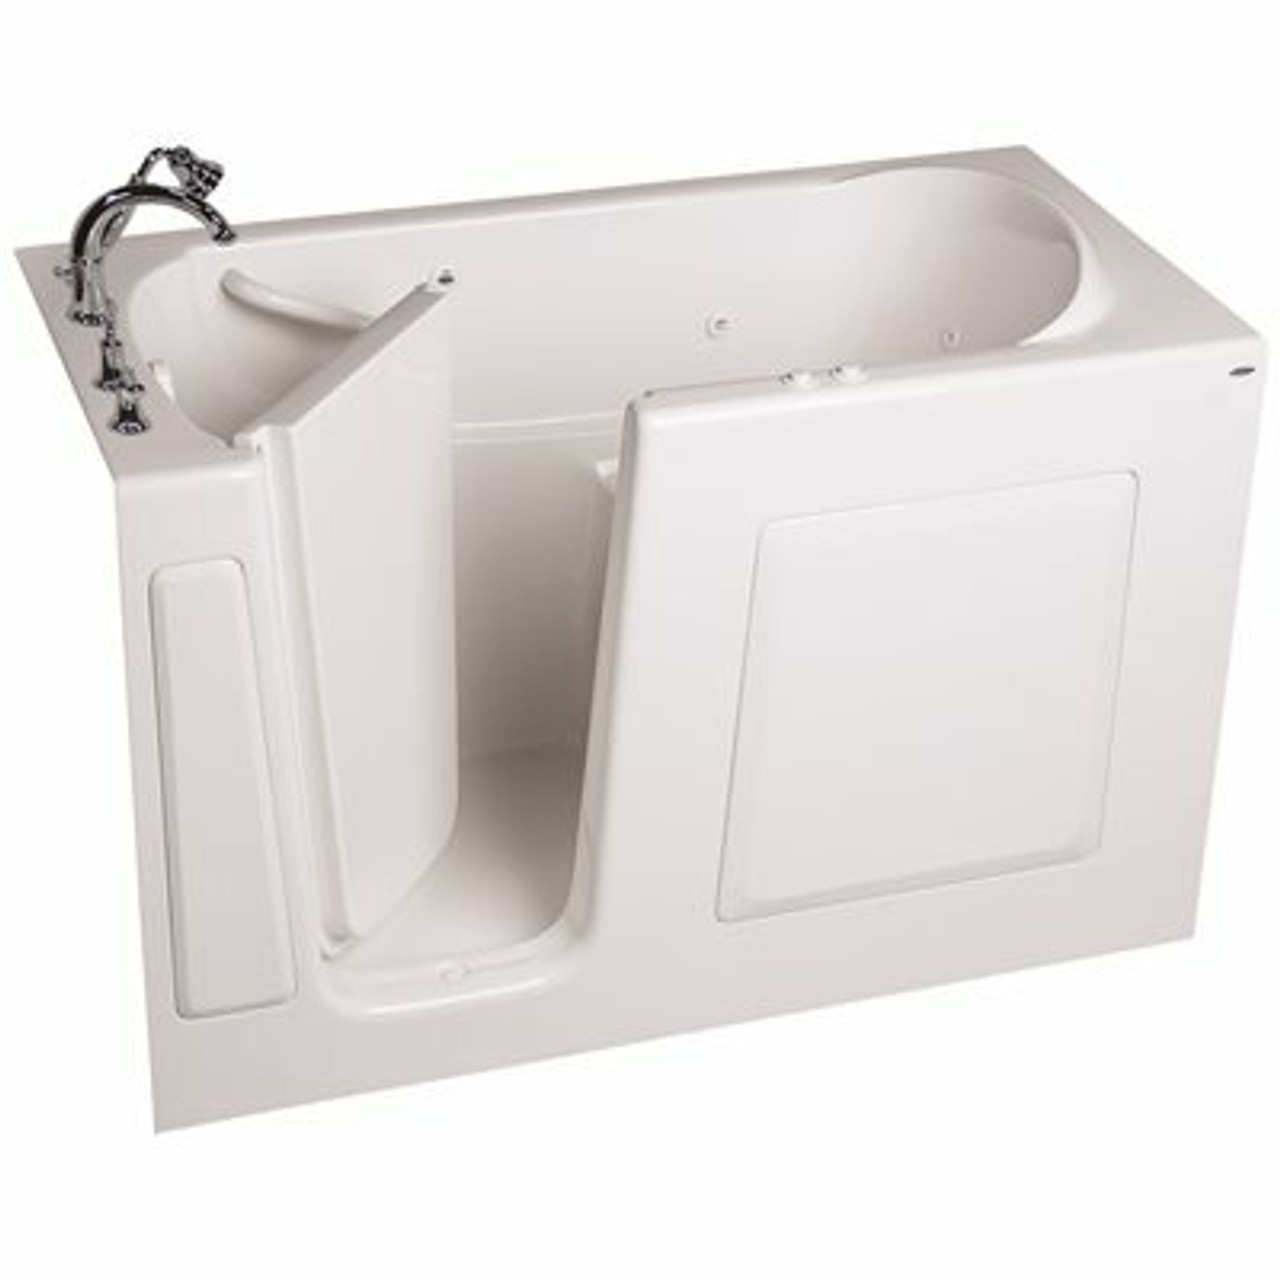 American Standard Gelcoat Walk-In Bath, Combination, Left-Hand With Quick Drain And Faucet, White, 30 In. X 60 In.